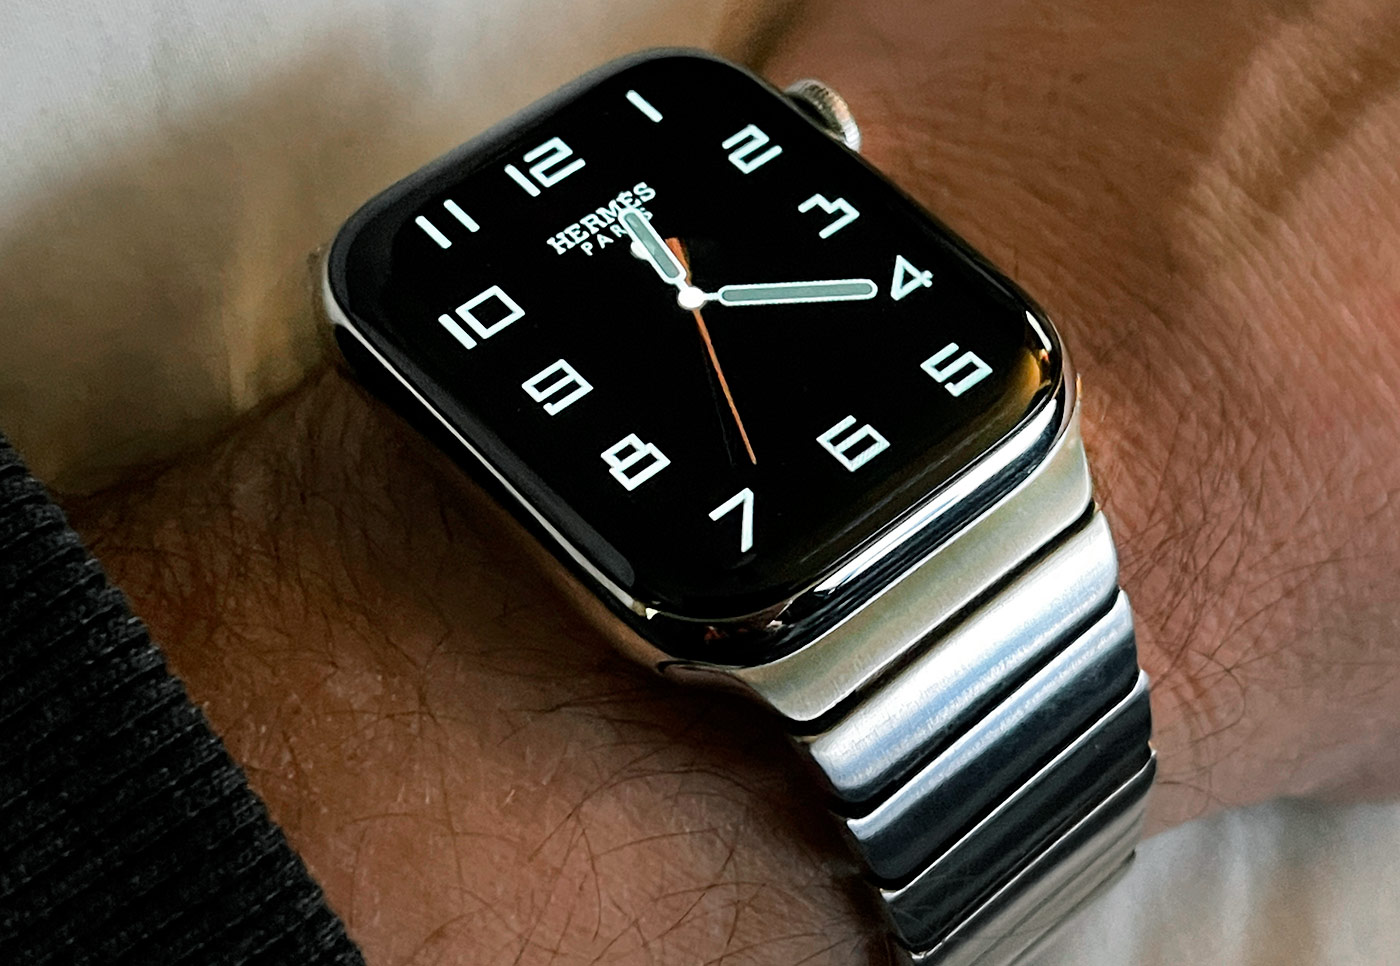 Show off your Apple Watch | Page 584 | MacRumors Forums